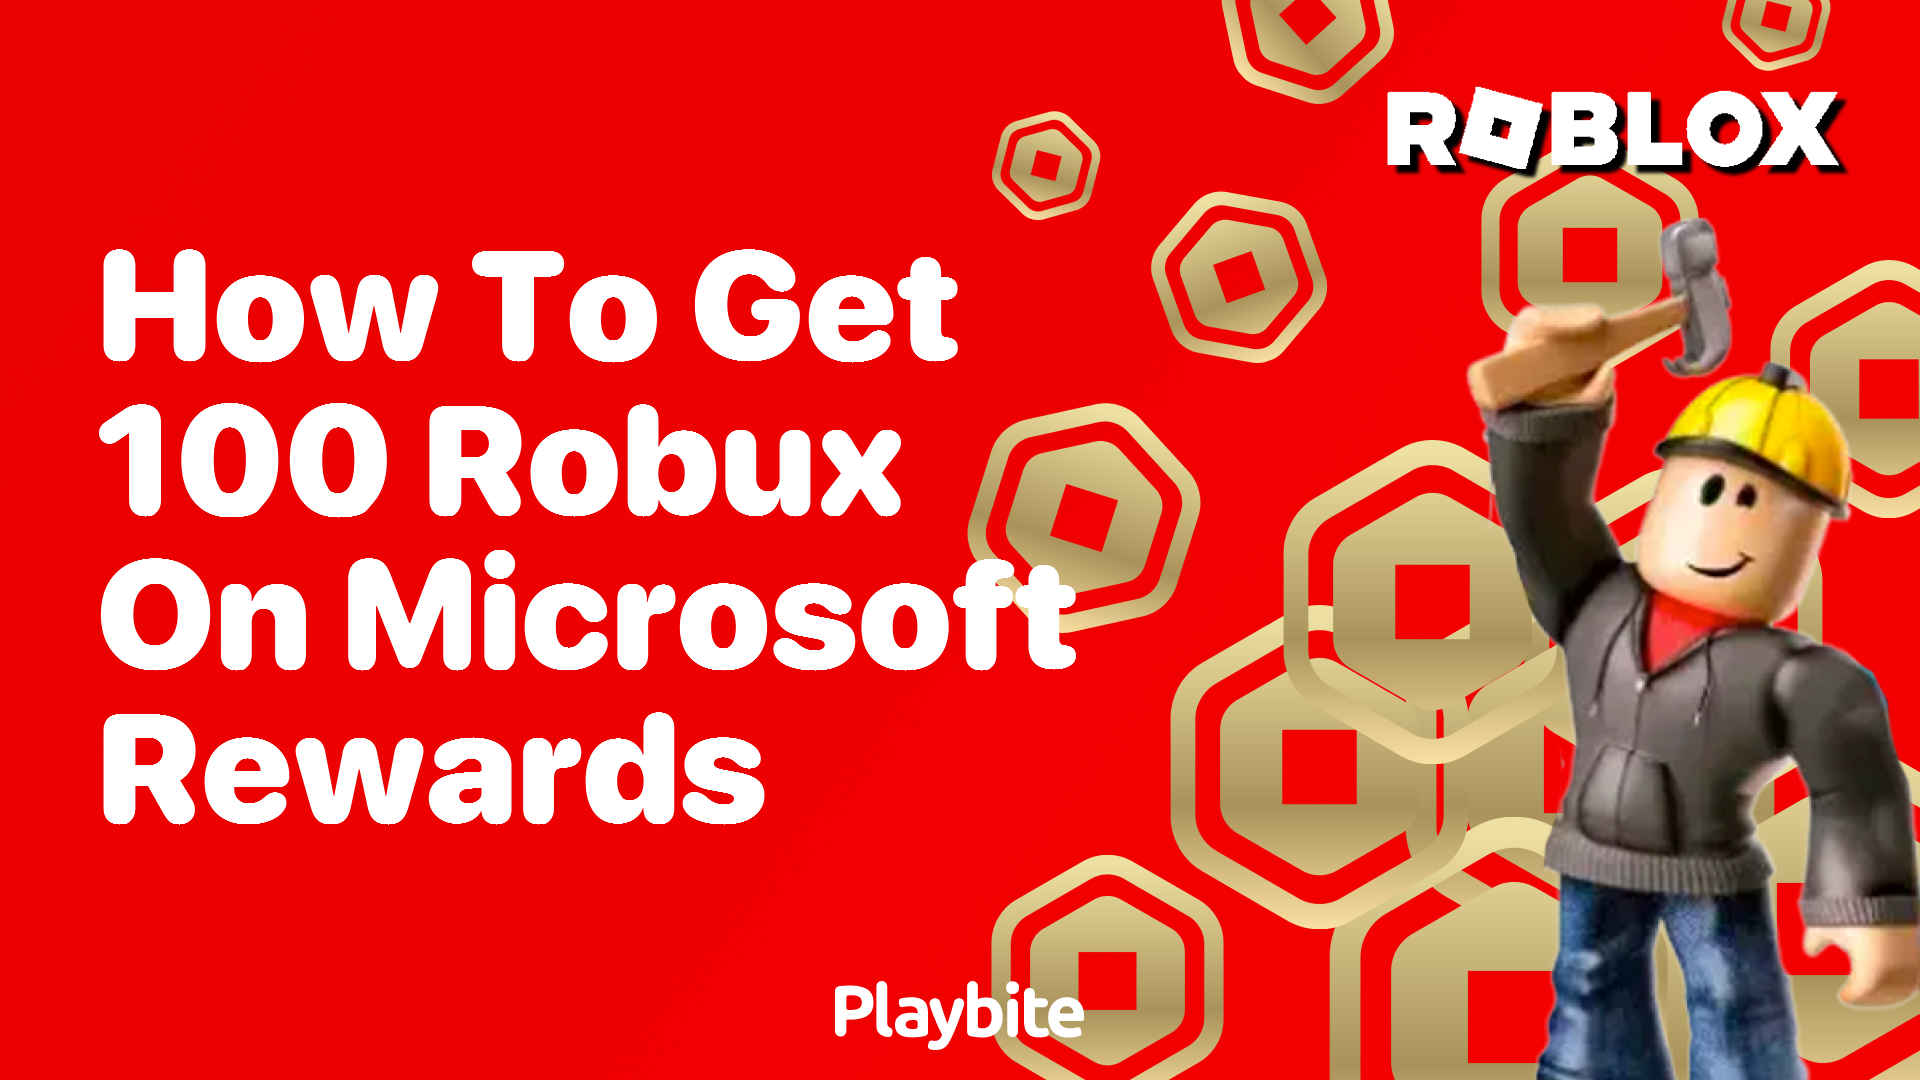 How to Get 100 Robux on Microsoft Rewards